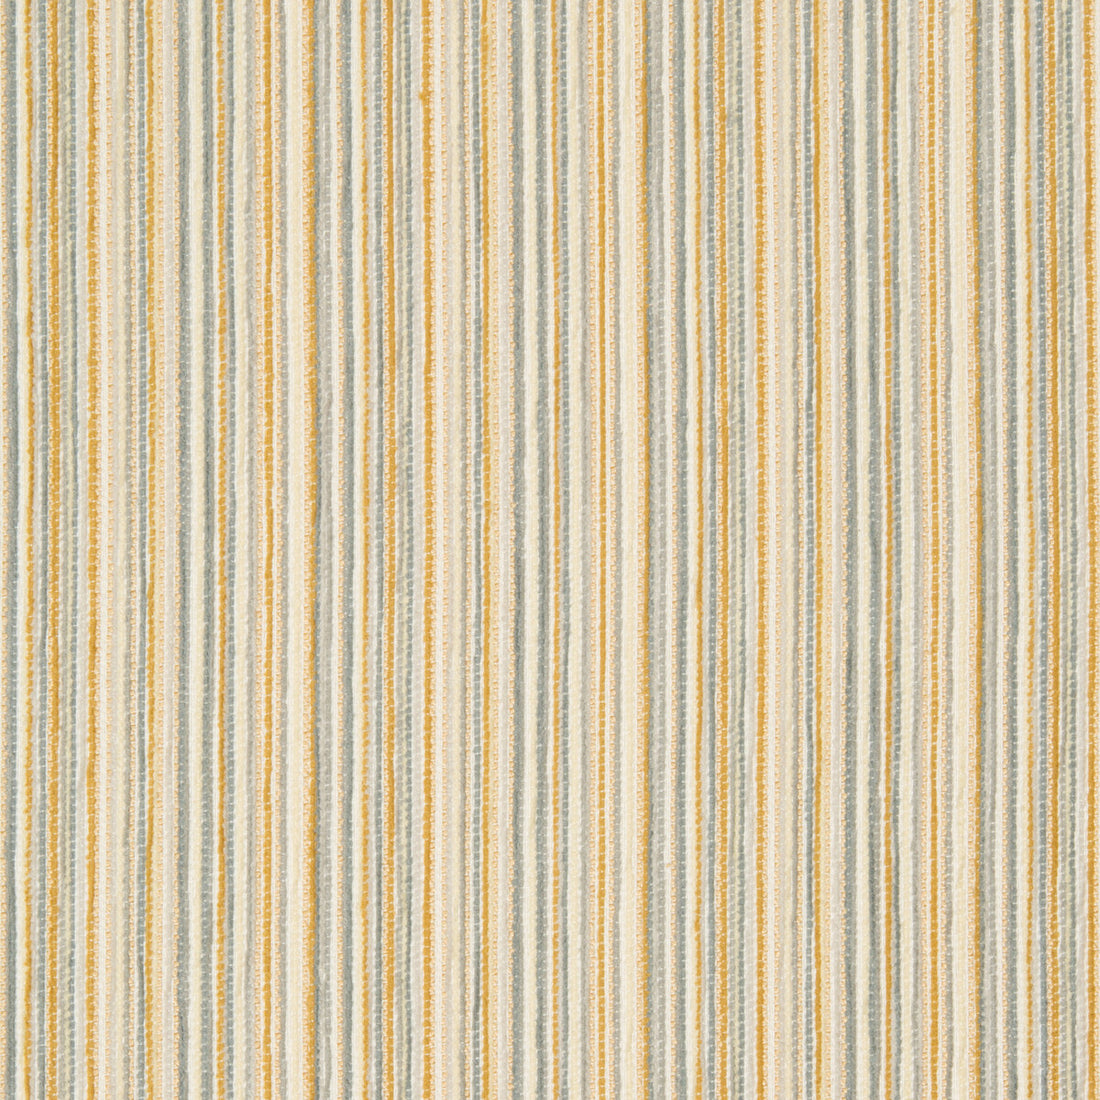 Kravet Contract fabric in 34740-411 color - pattern 34740.411.0 - by Kravet Contract in the Crypton Incase collection